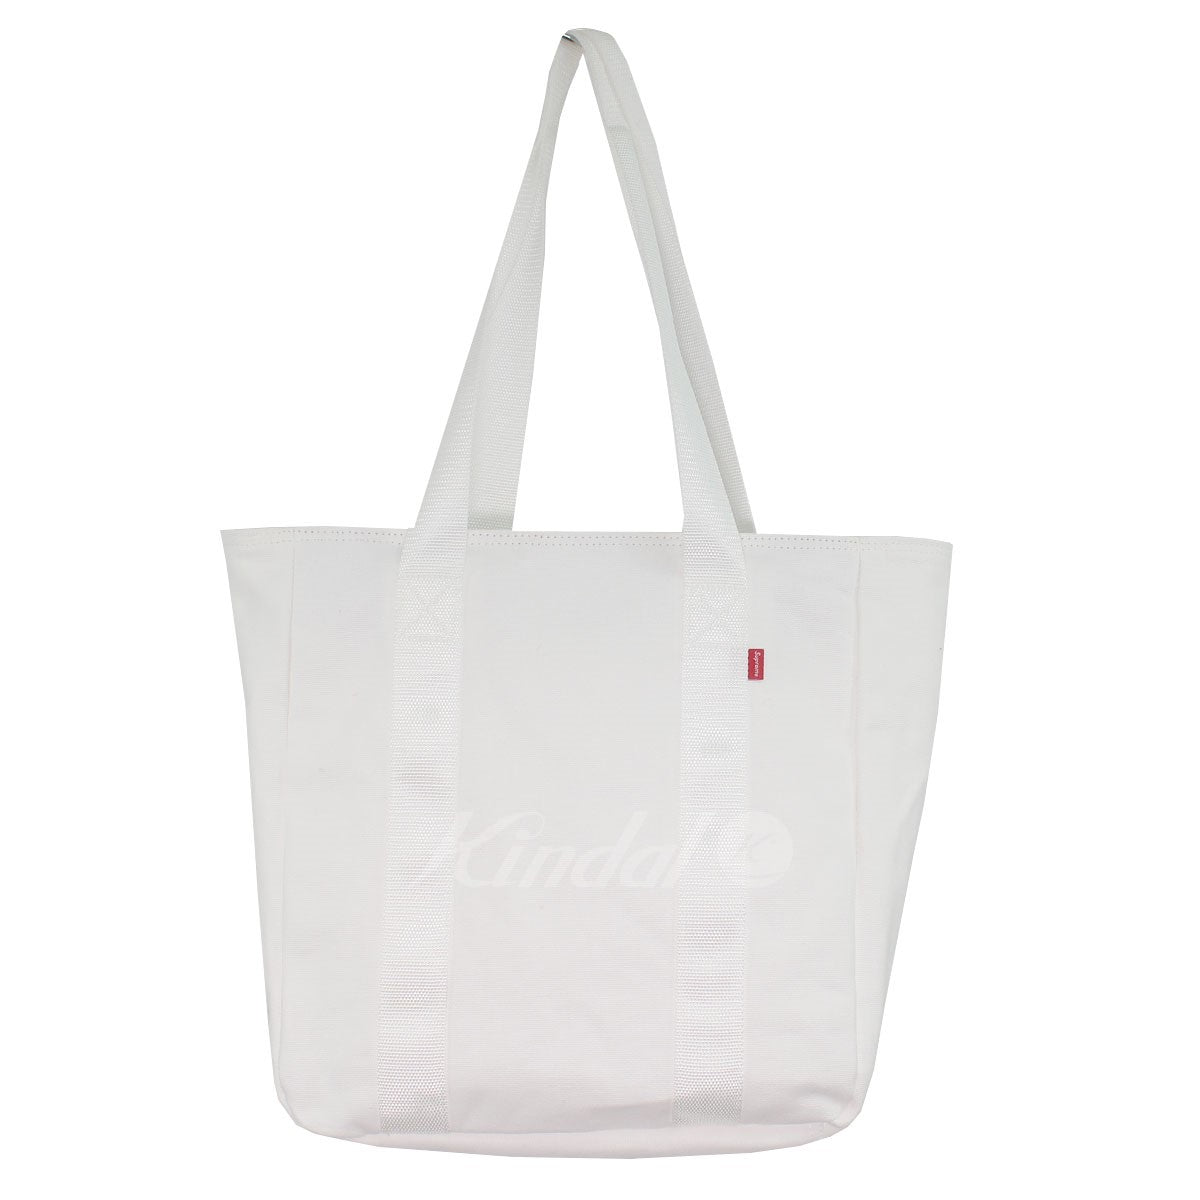 SUPREME(シュプリーム) 20AW Canvas Tote キャンバストートバッグ 【2月1日値下】